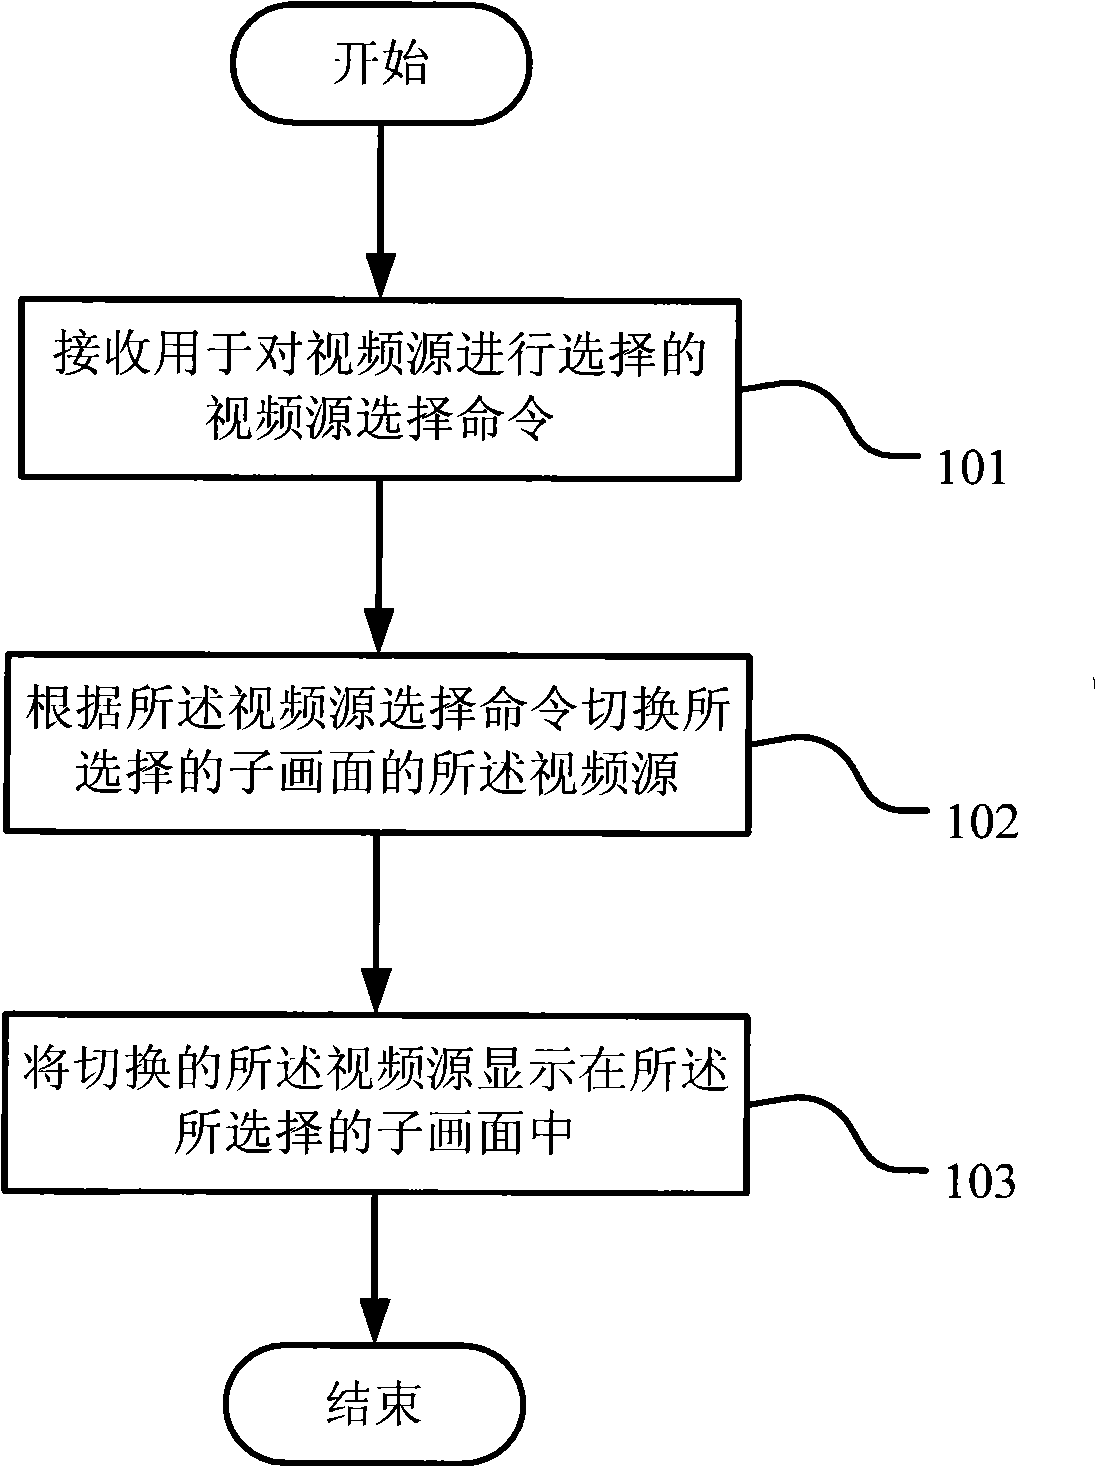 Method for selecting combined picture video source and apparatus thereof